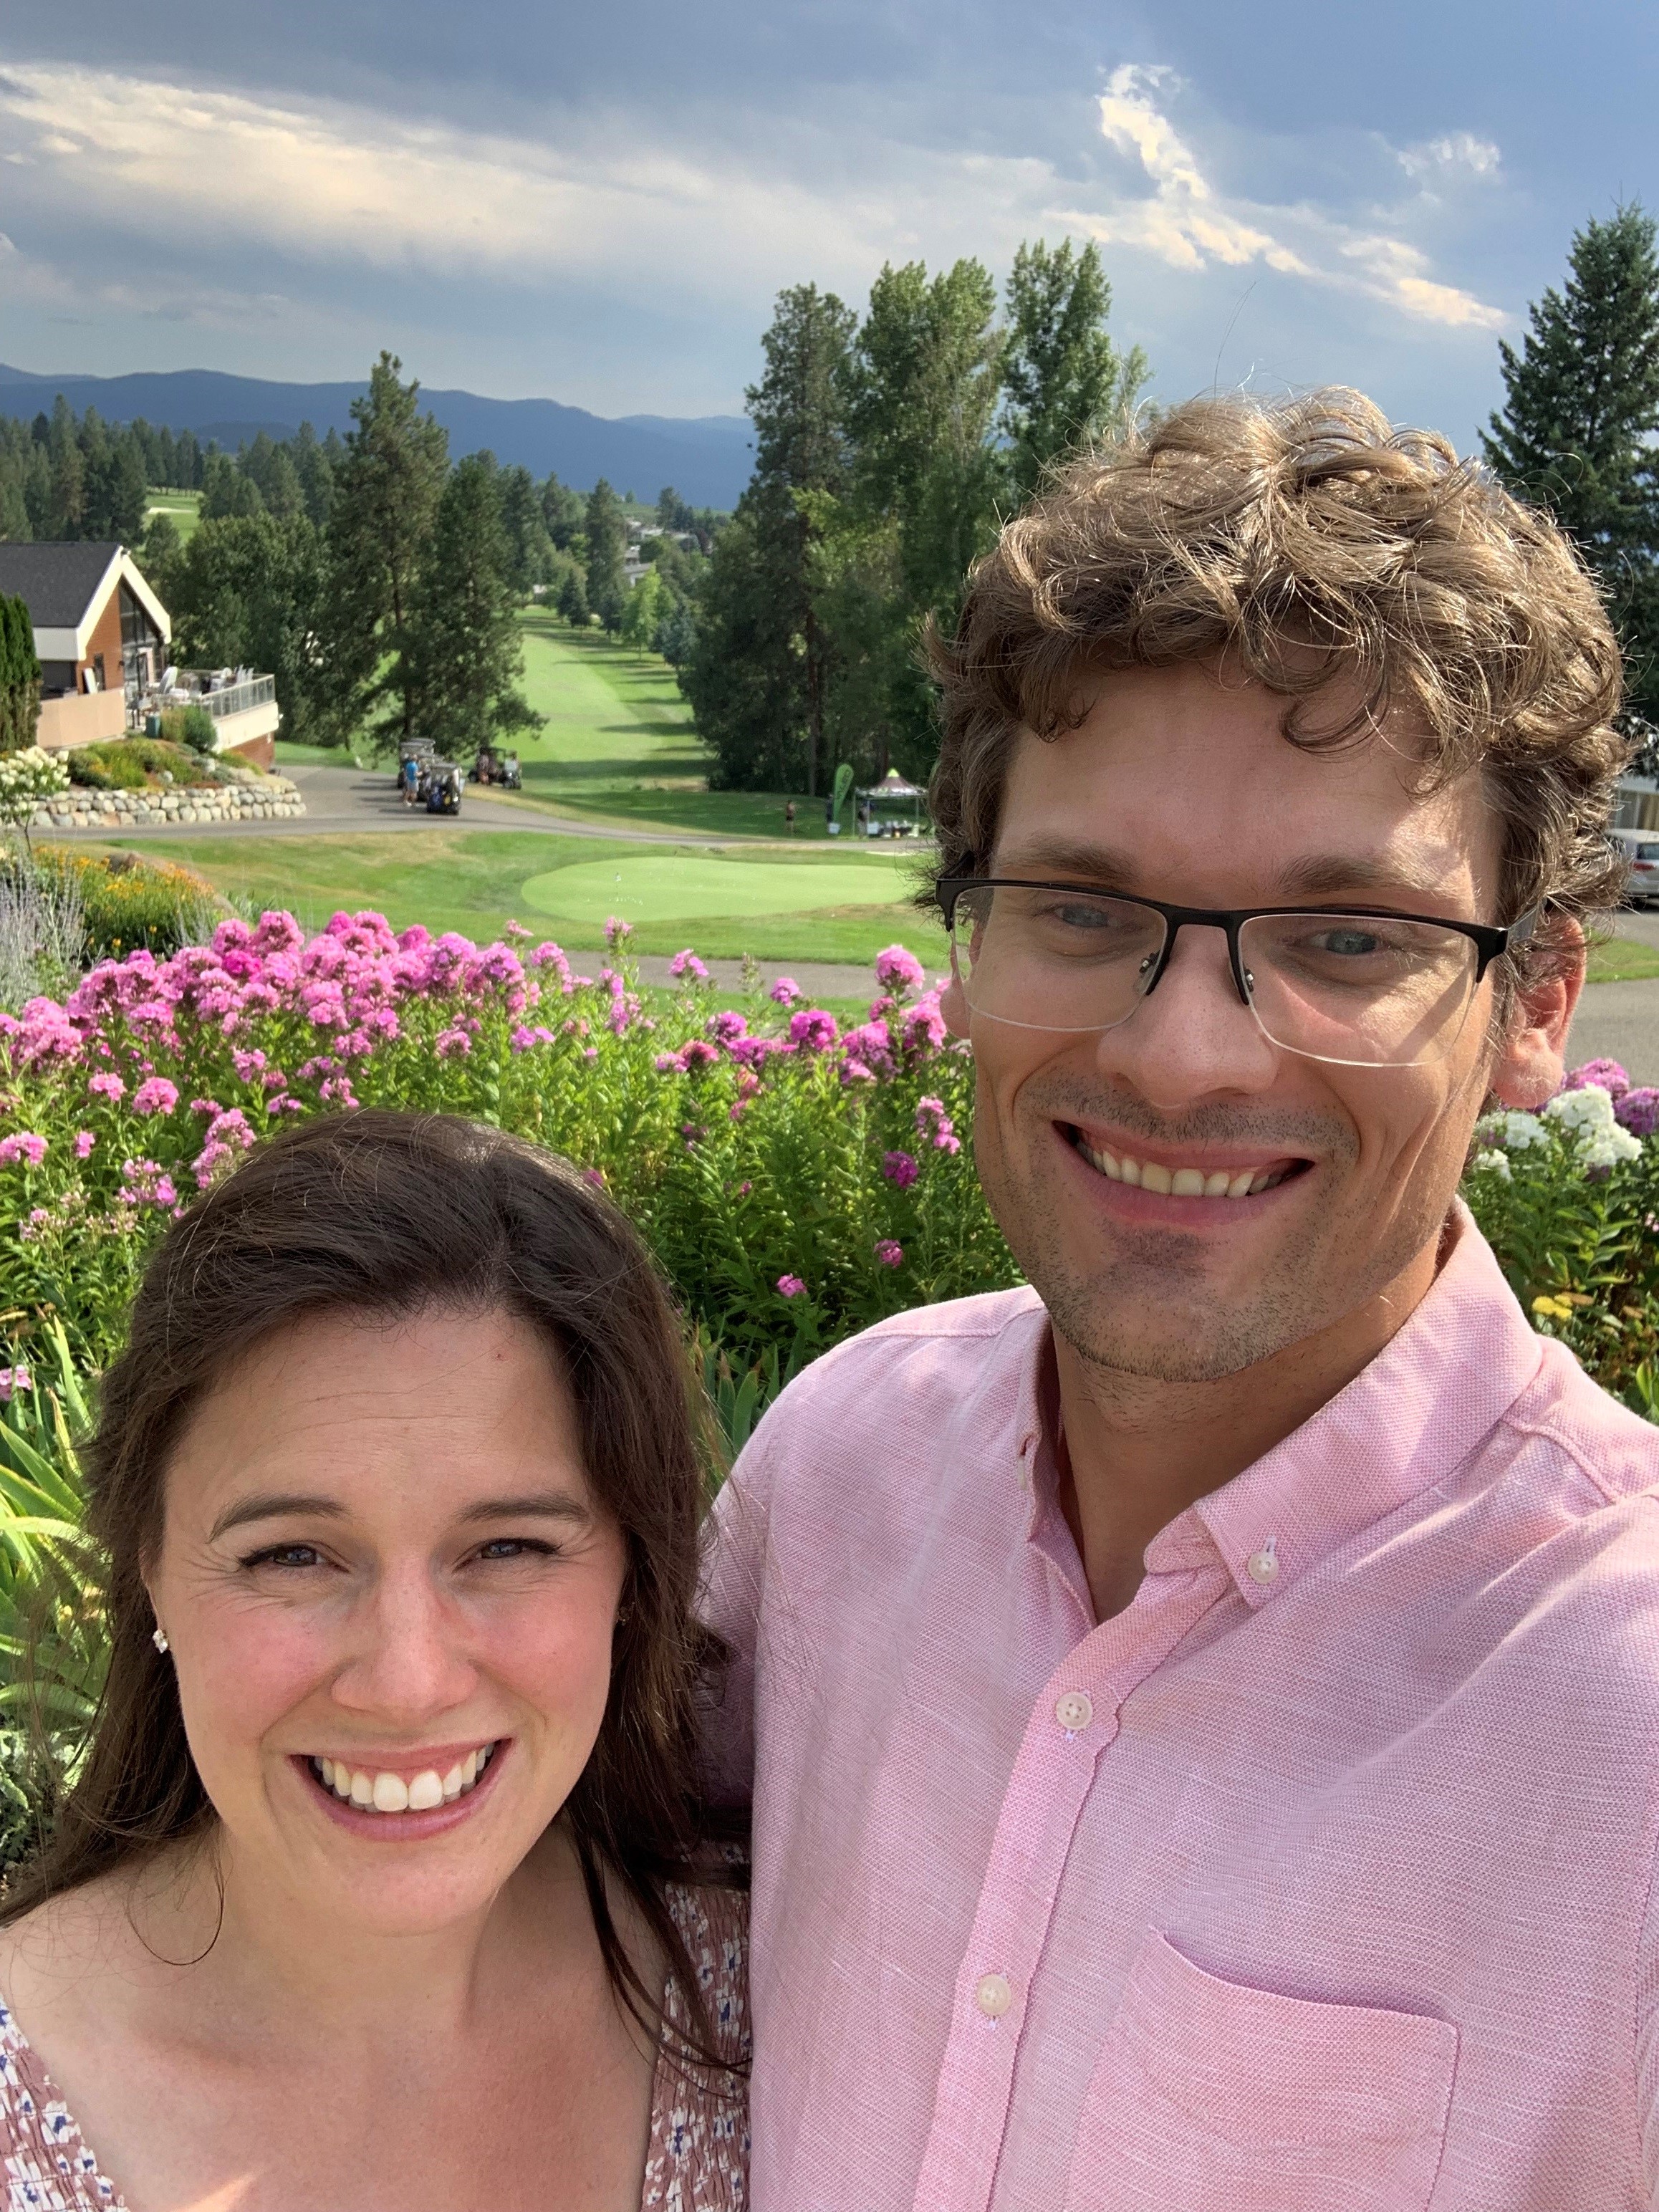 A smiling man and woman with an arm around each other pose for a picture outside with flowers and a golf course in the background.